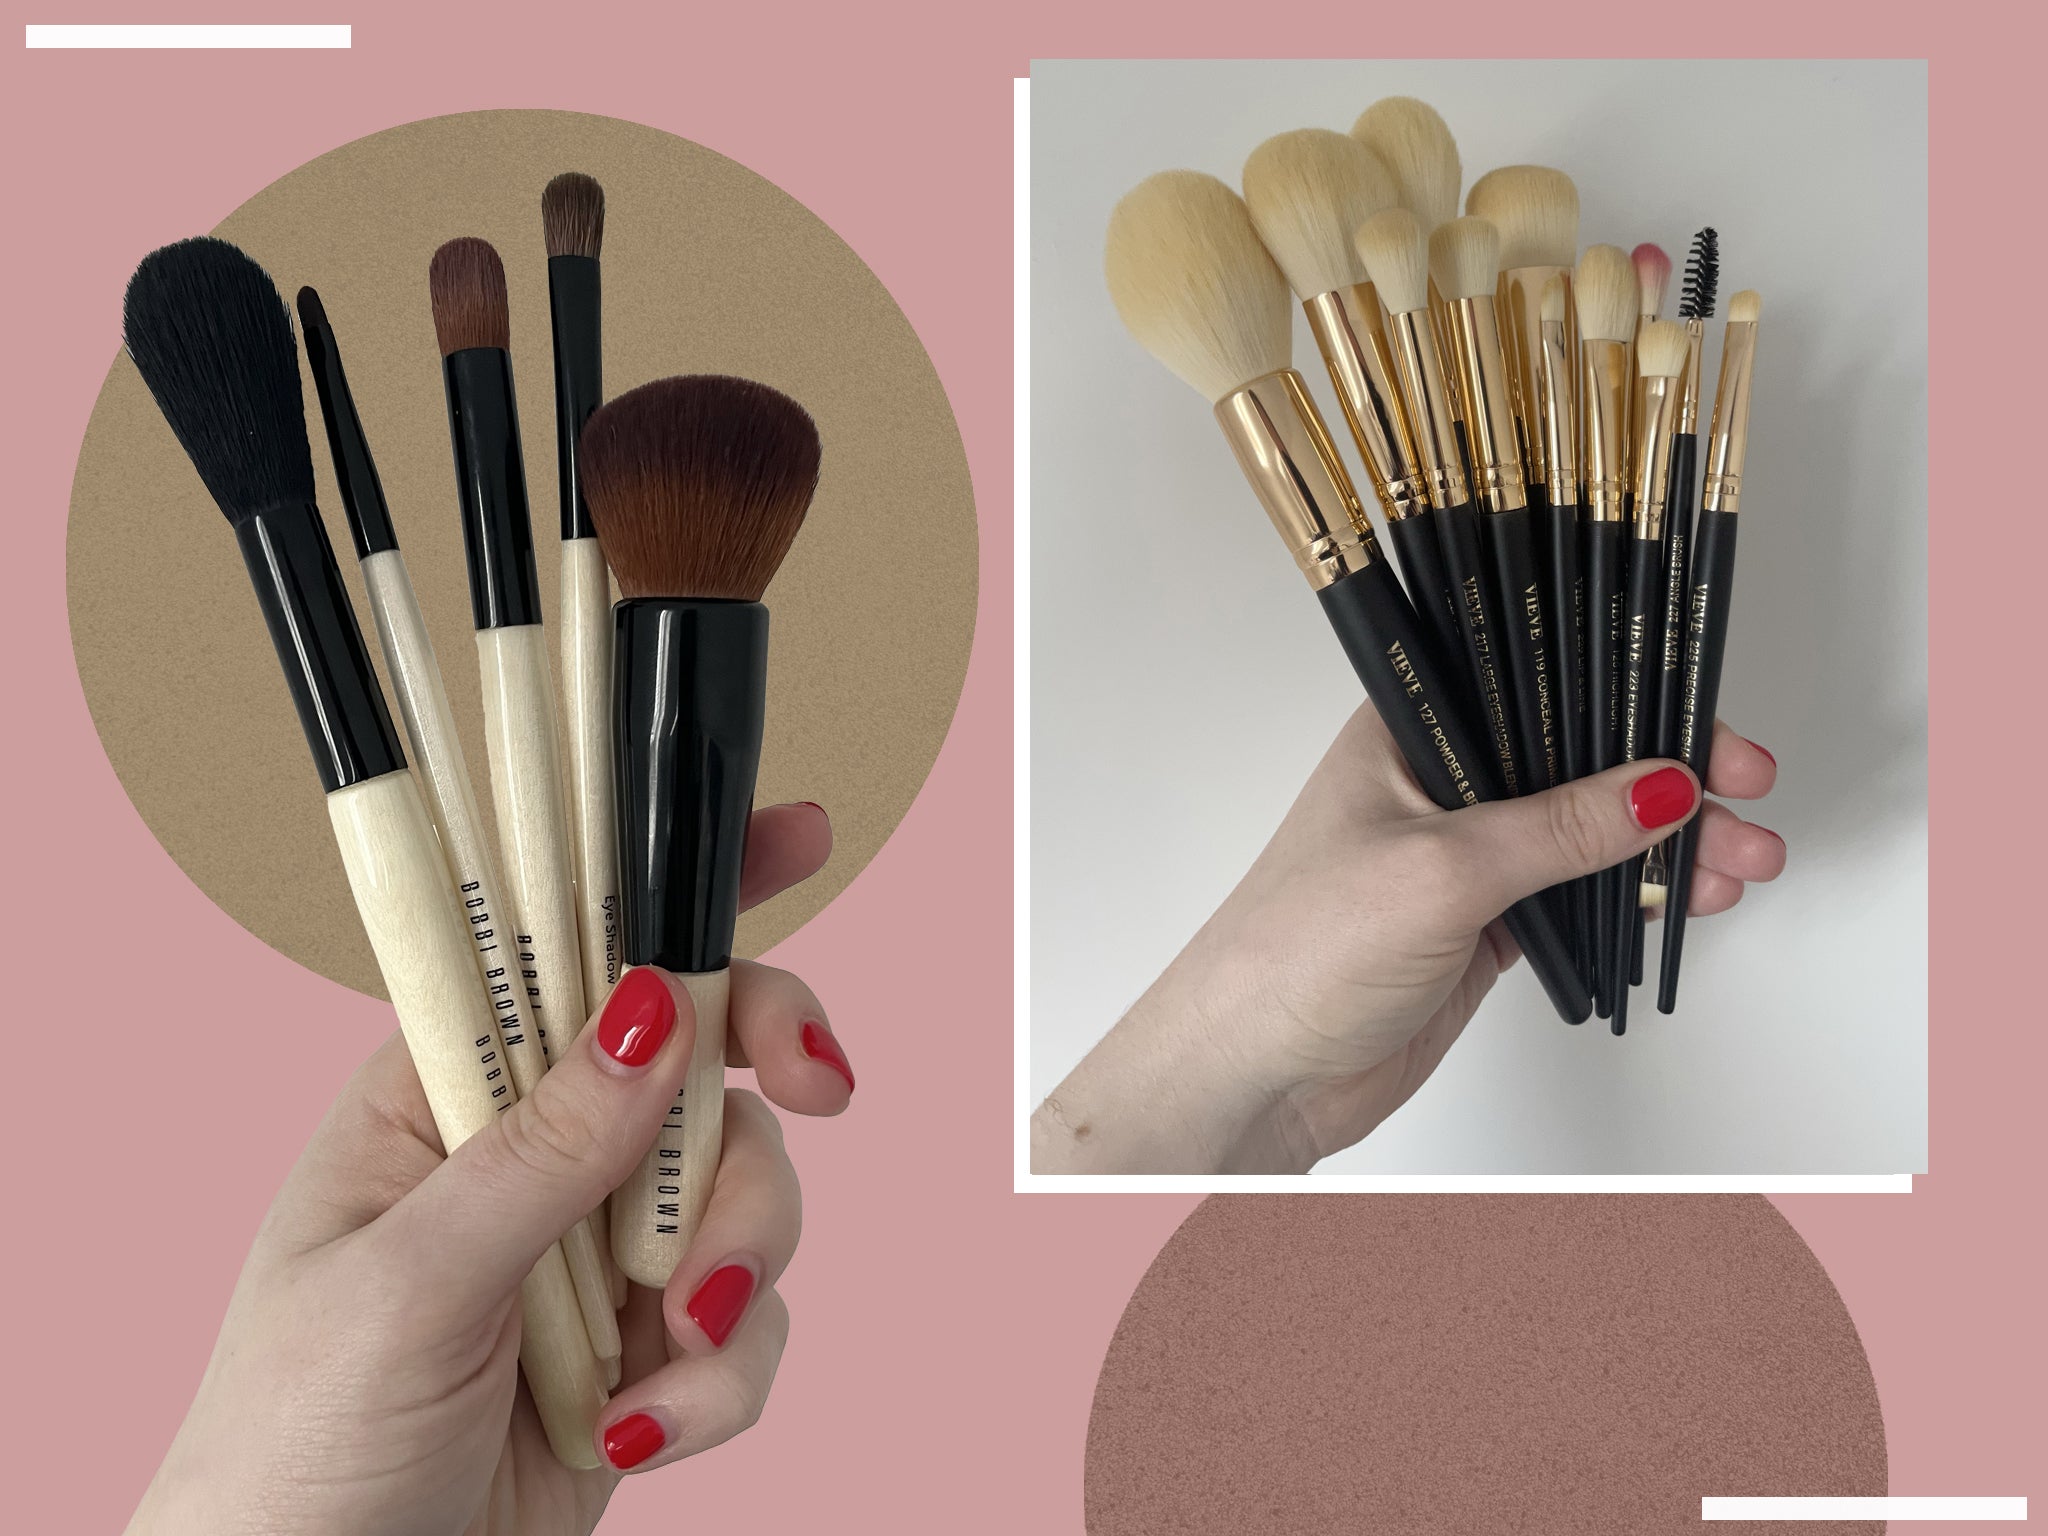 8 best make-up brush sets for applying liquid, cream and powder products